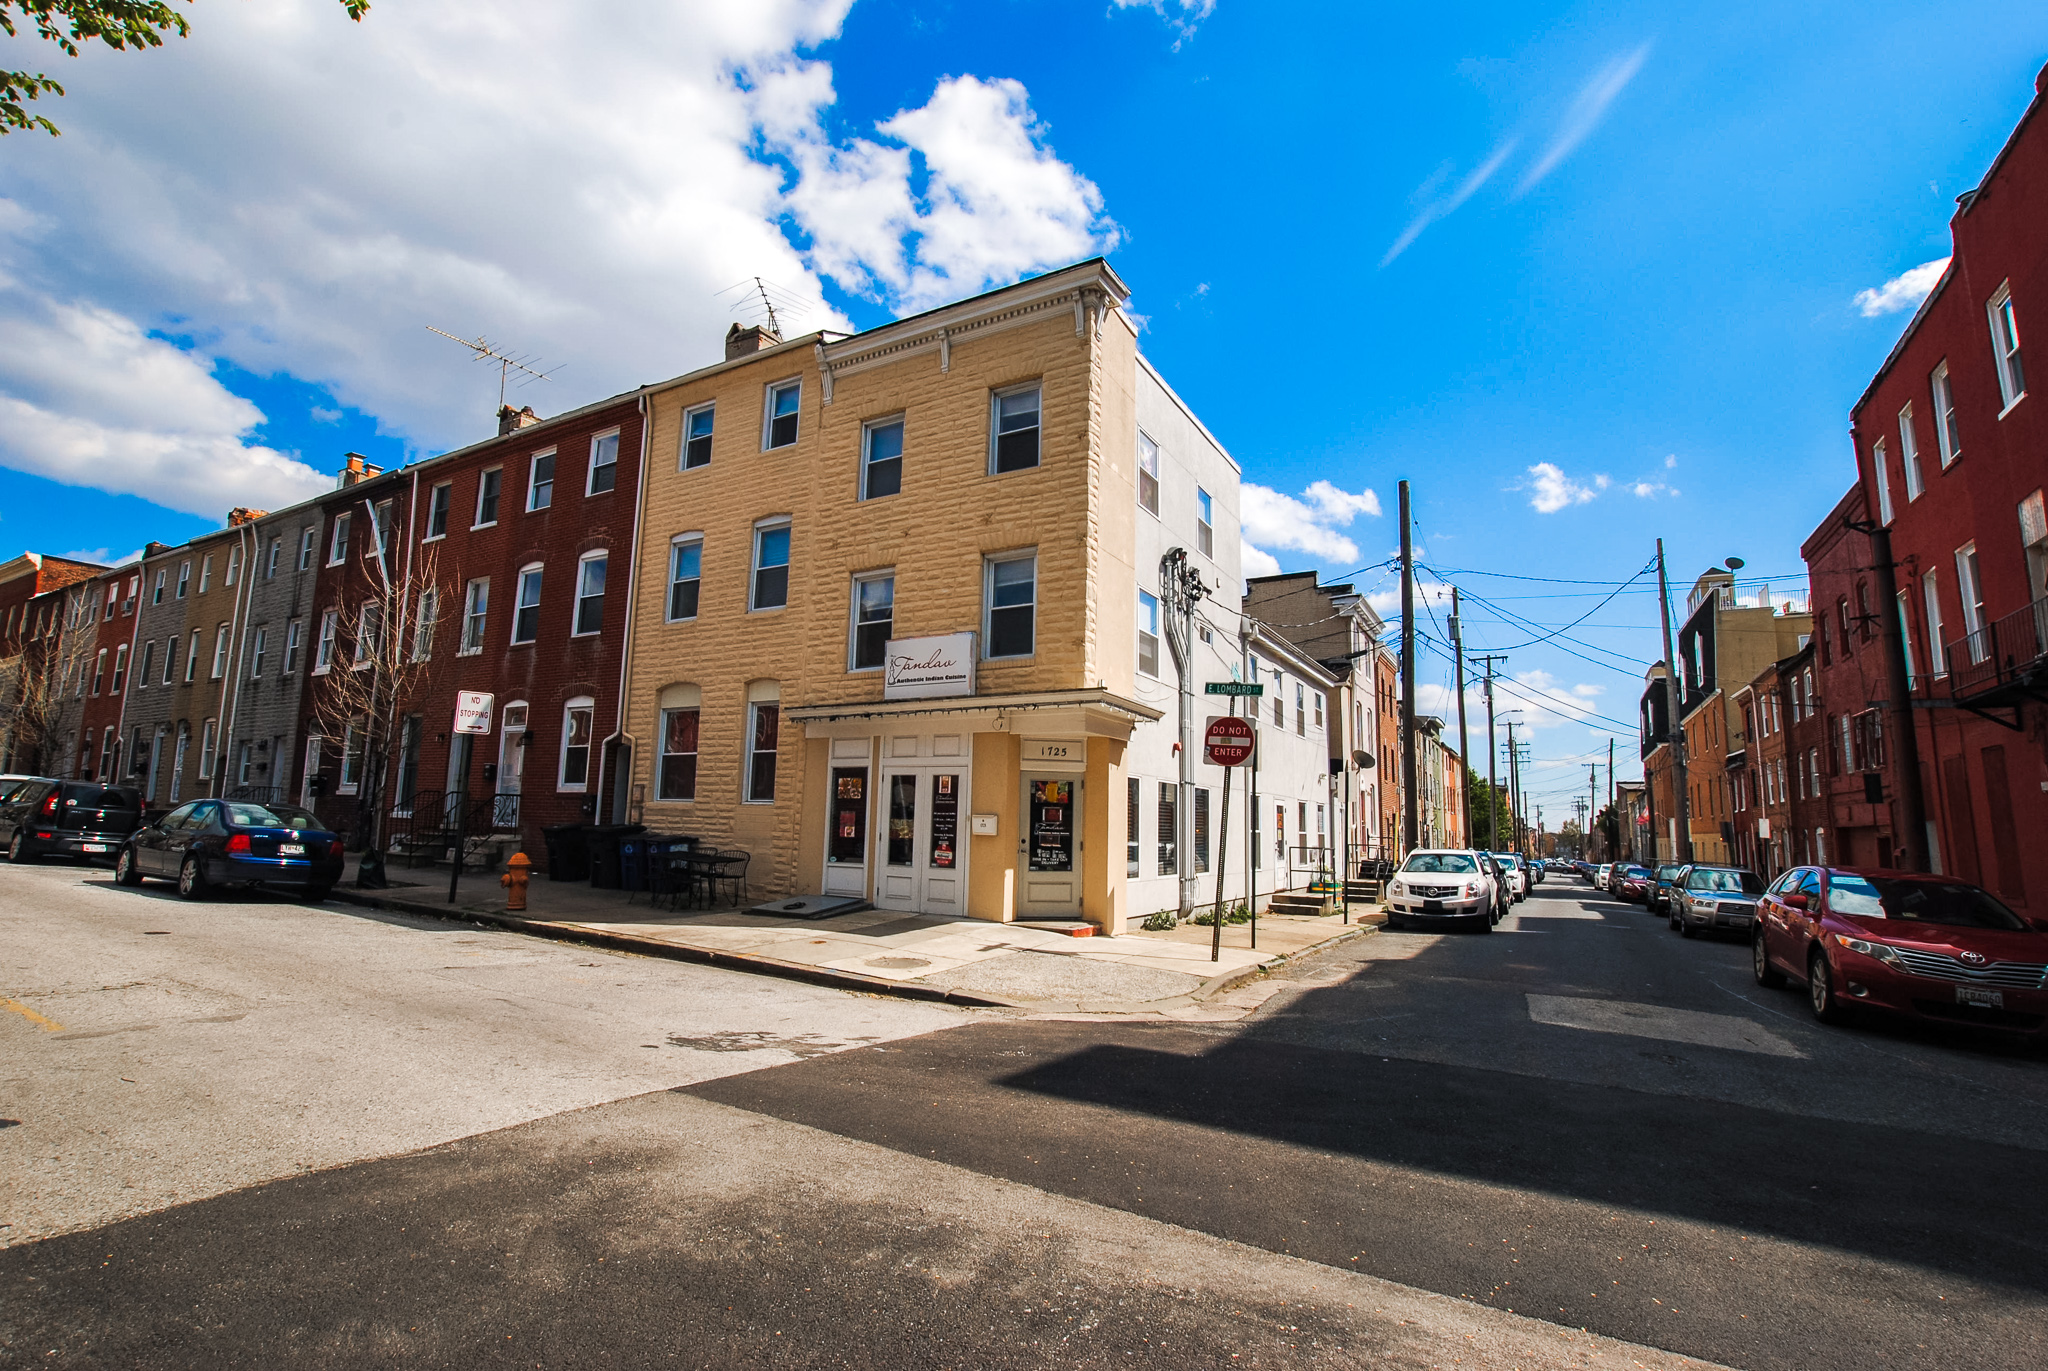 1725/1729 East Lombard St: 1 Retail Space/ 2 Apartments/ 1 Townhouse in Historic Upper Fells Point